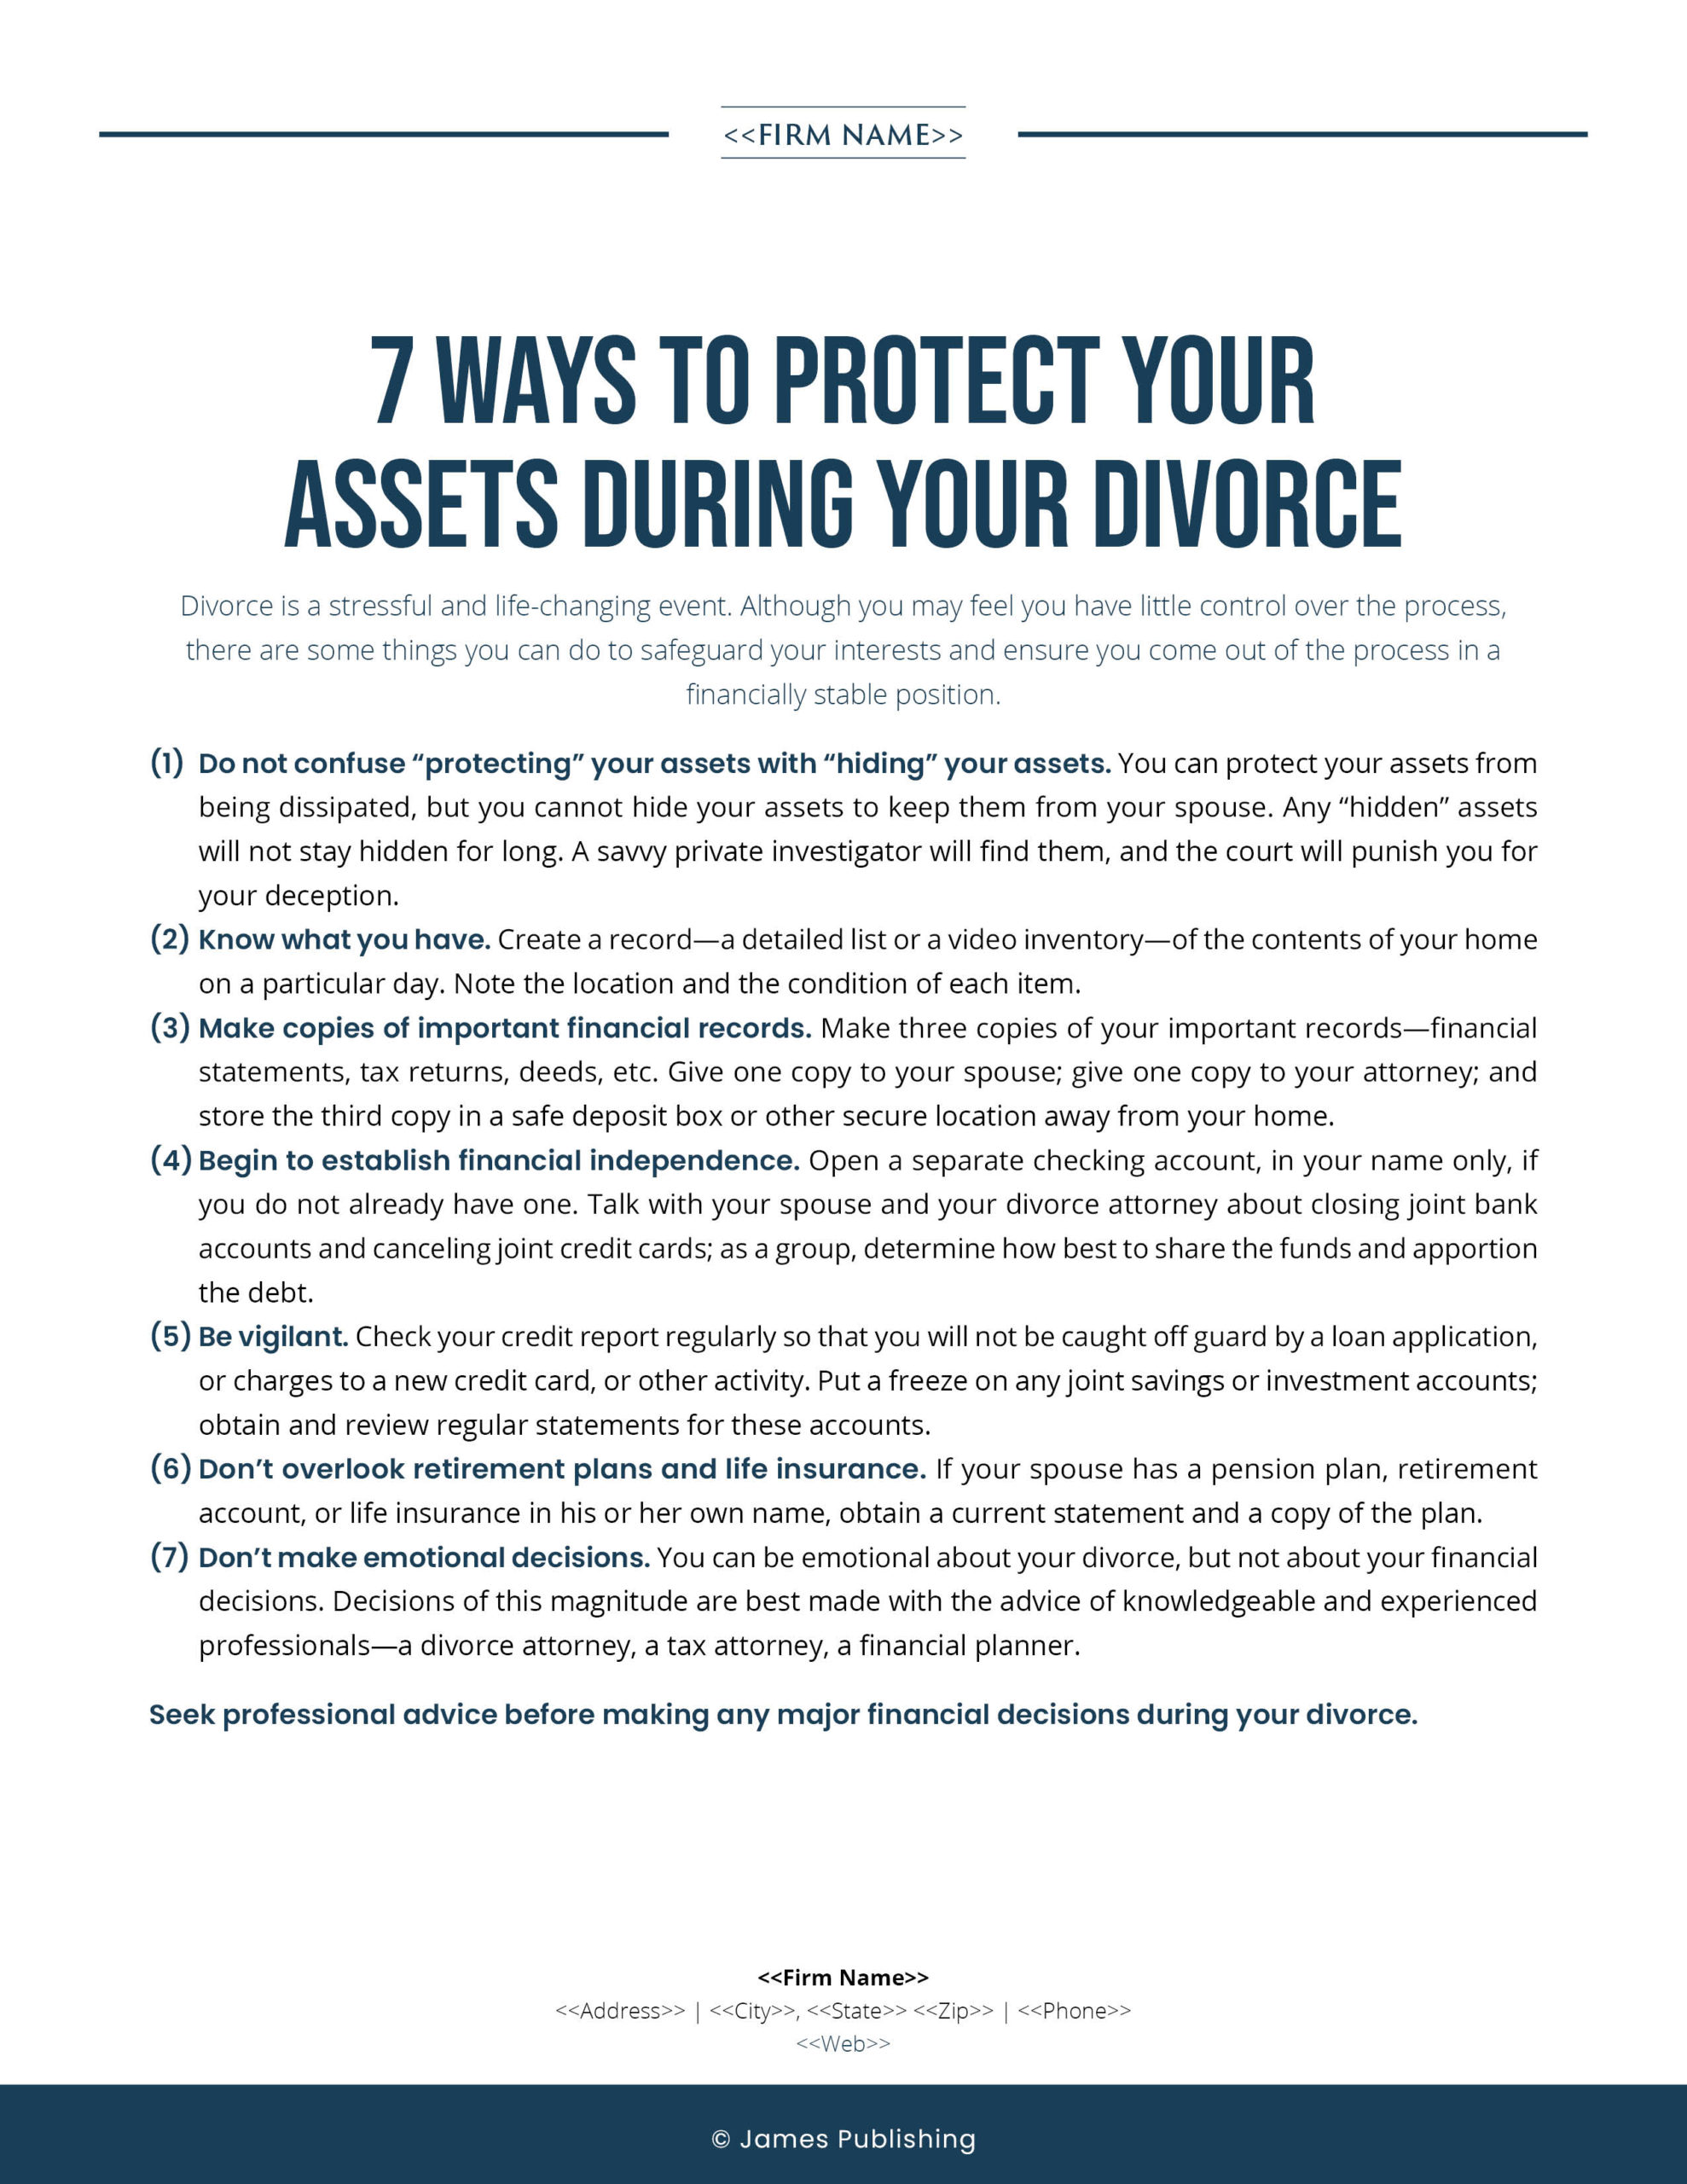 FAM-03 7 Ways to Protect Your Assets During Your Divorce